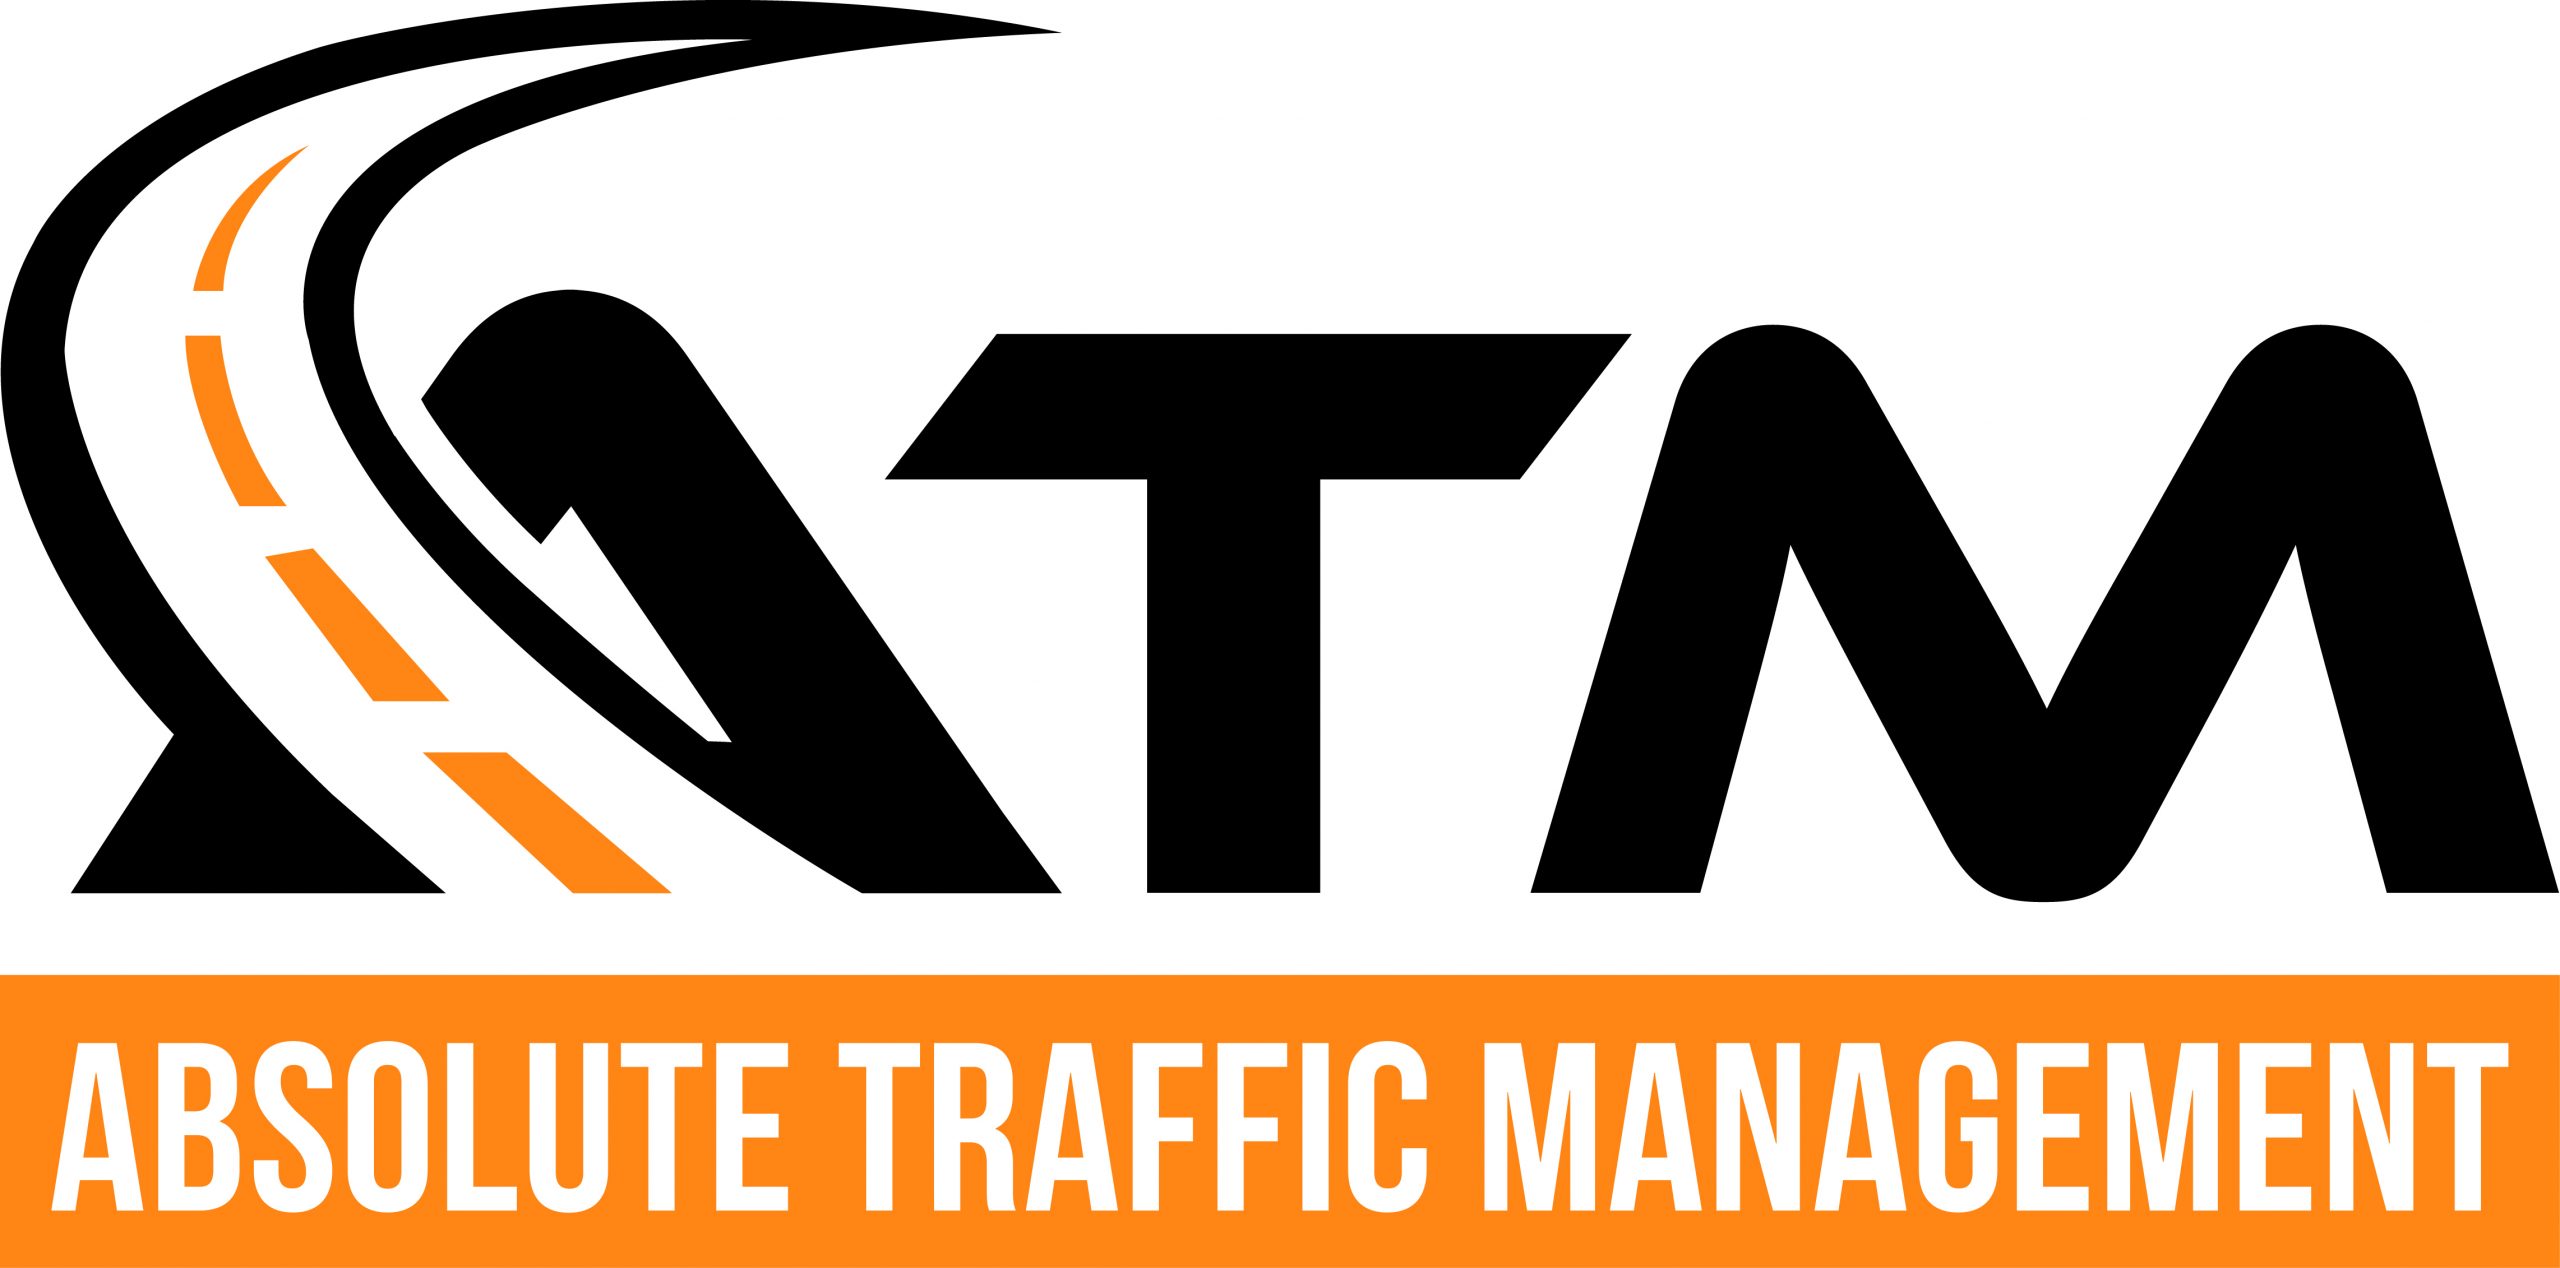 Absolute Traffic Management - Traffic Control Services Sydney